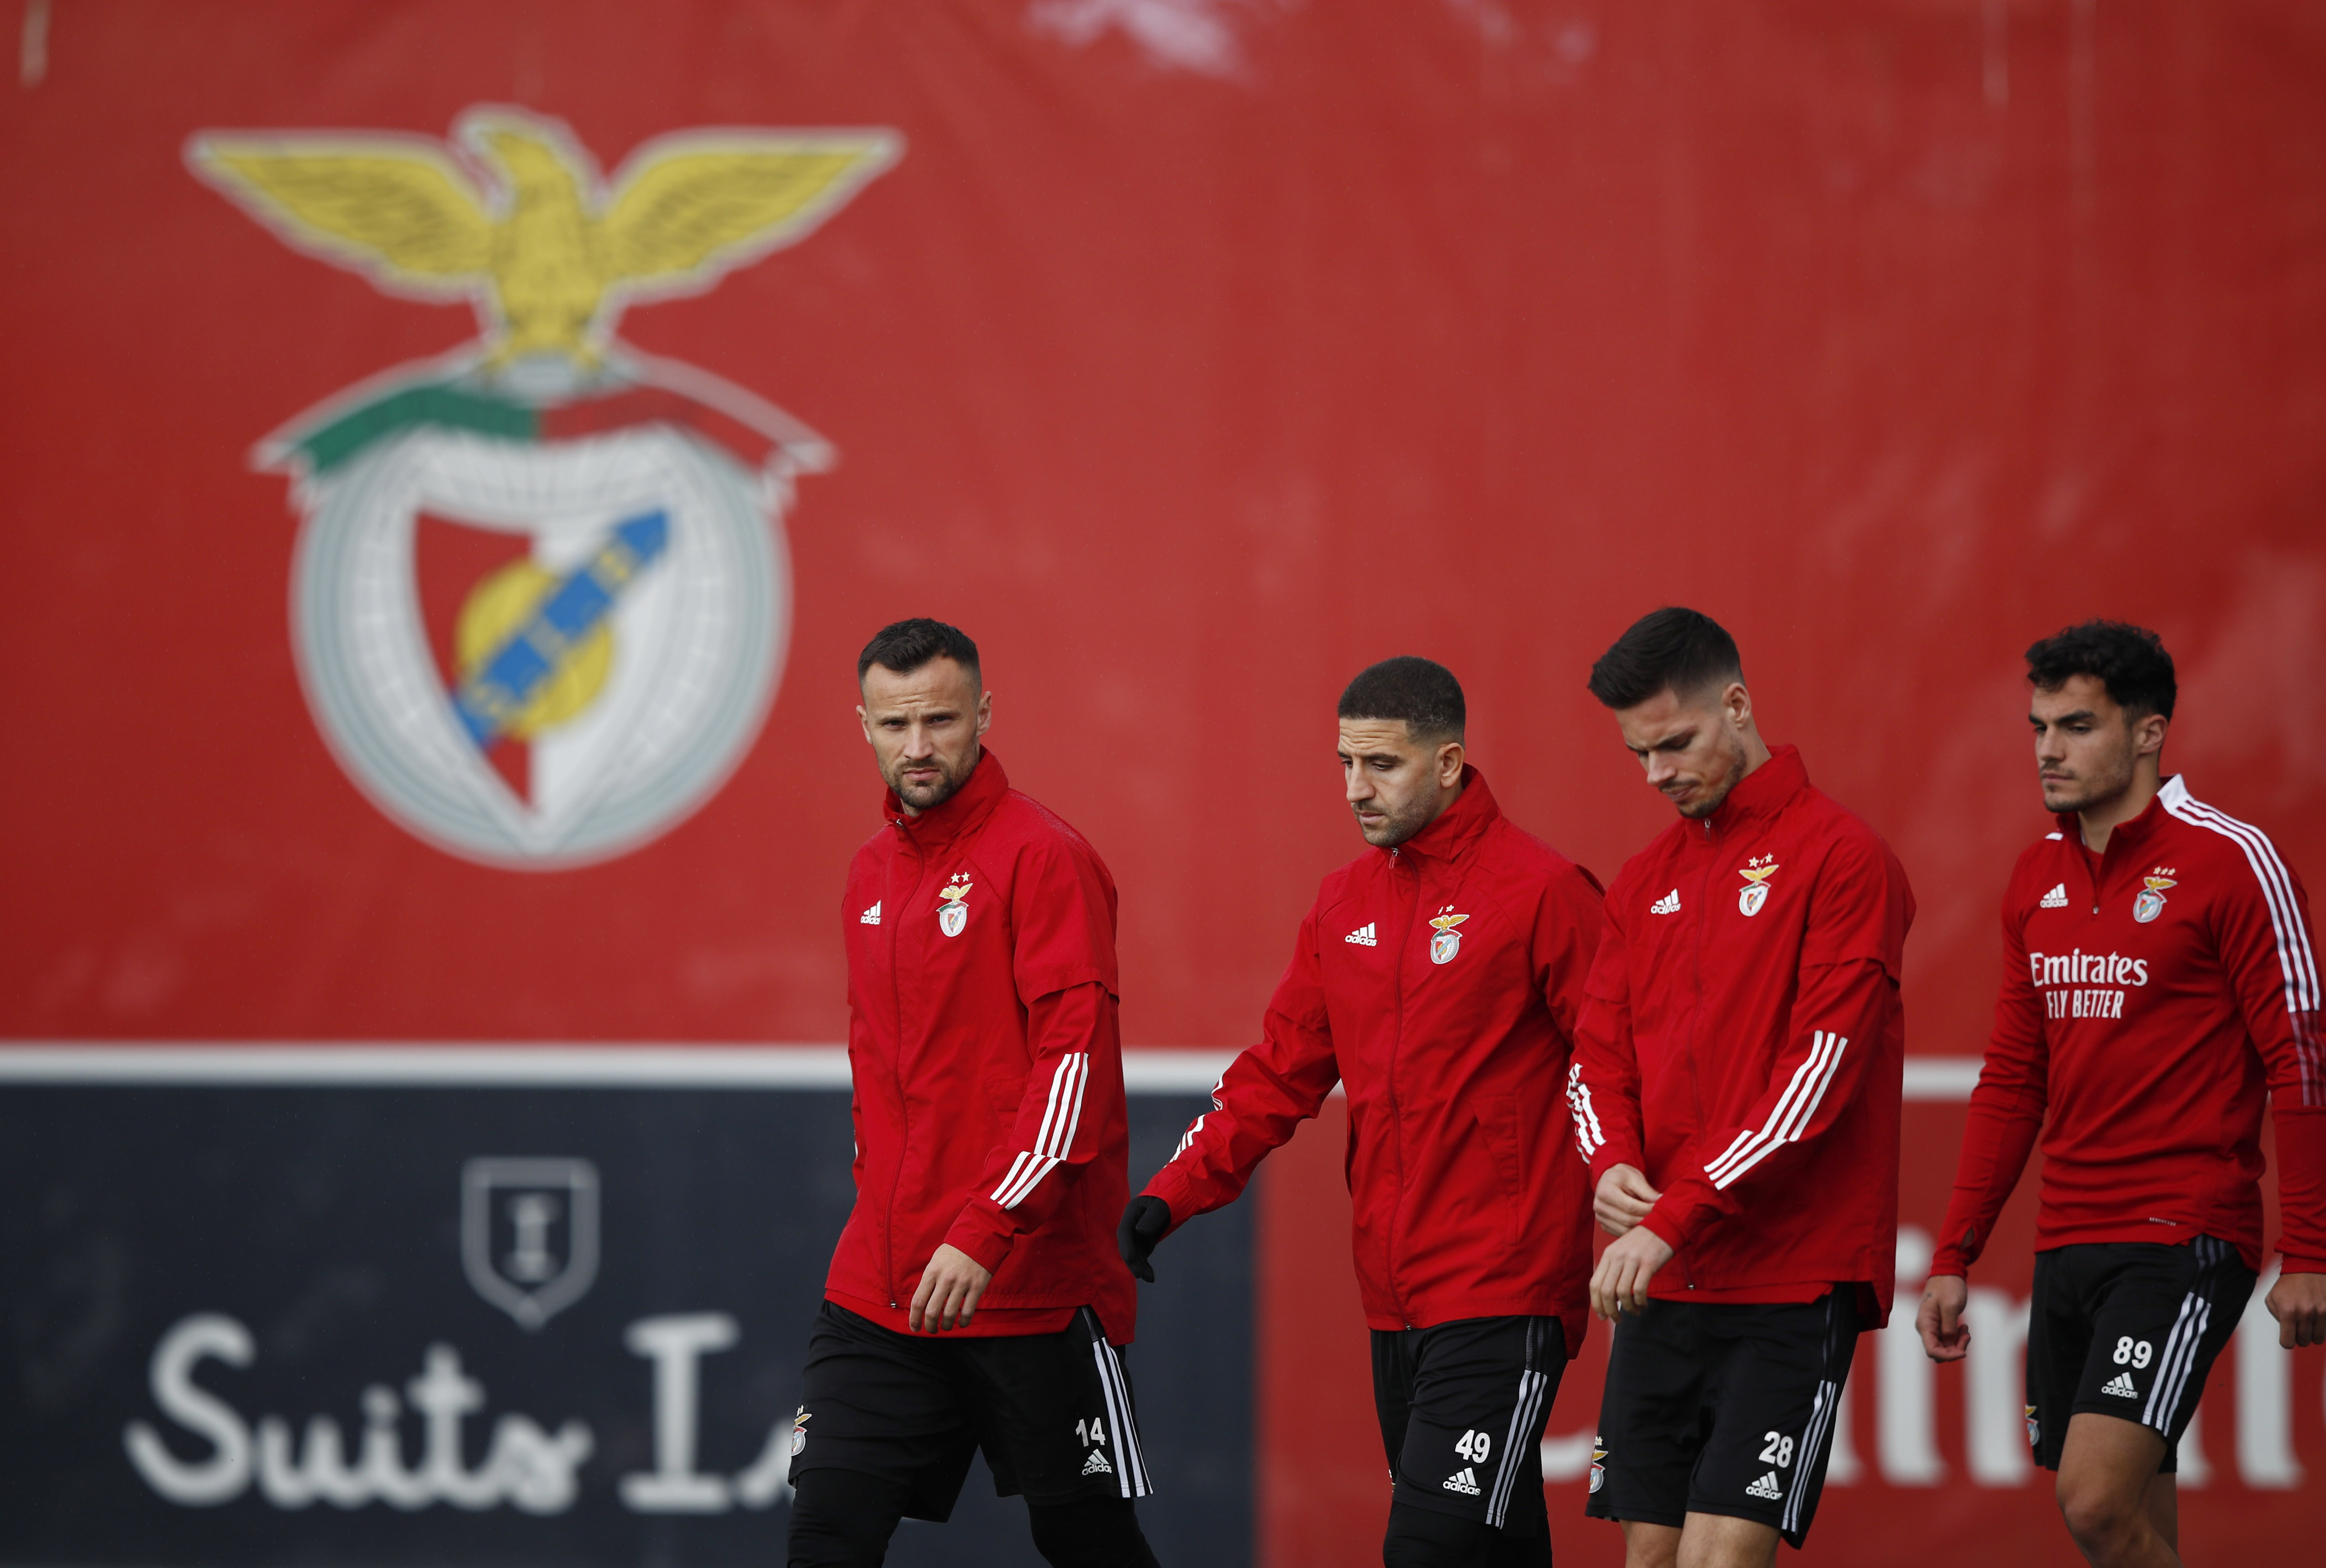 Champions League - Benfica Training